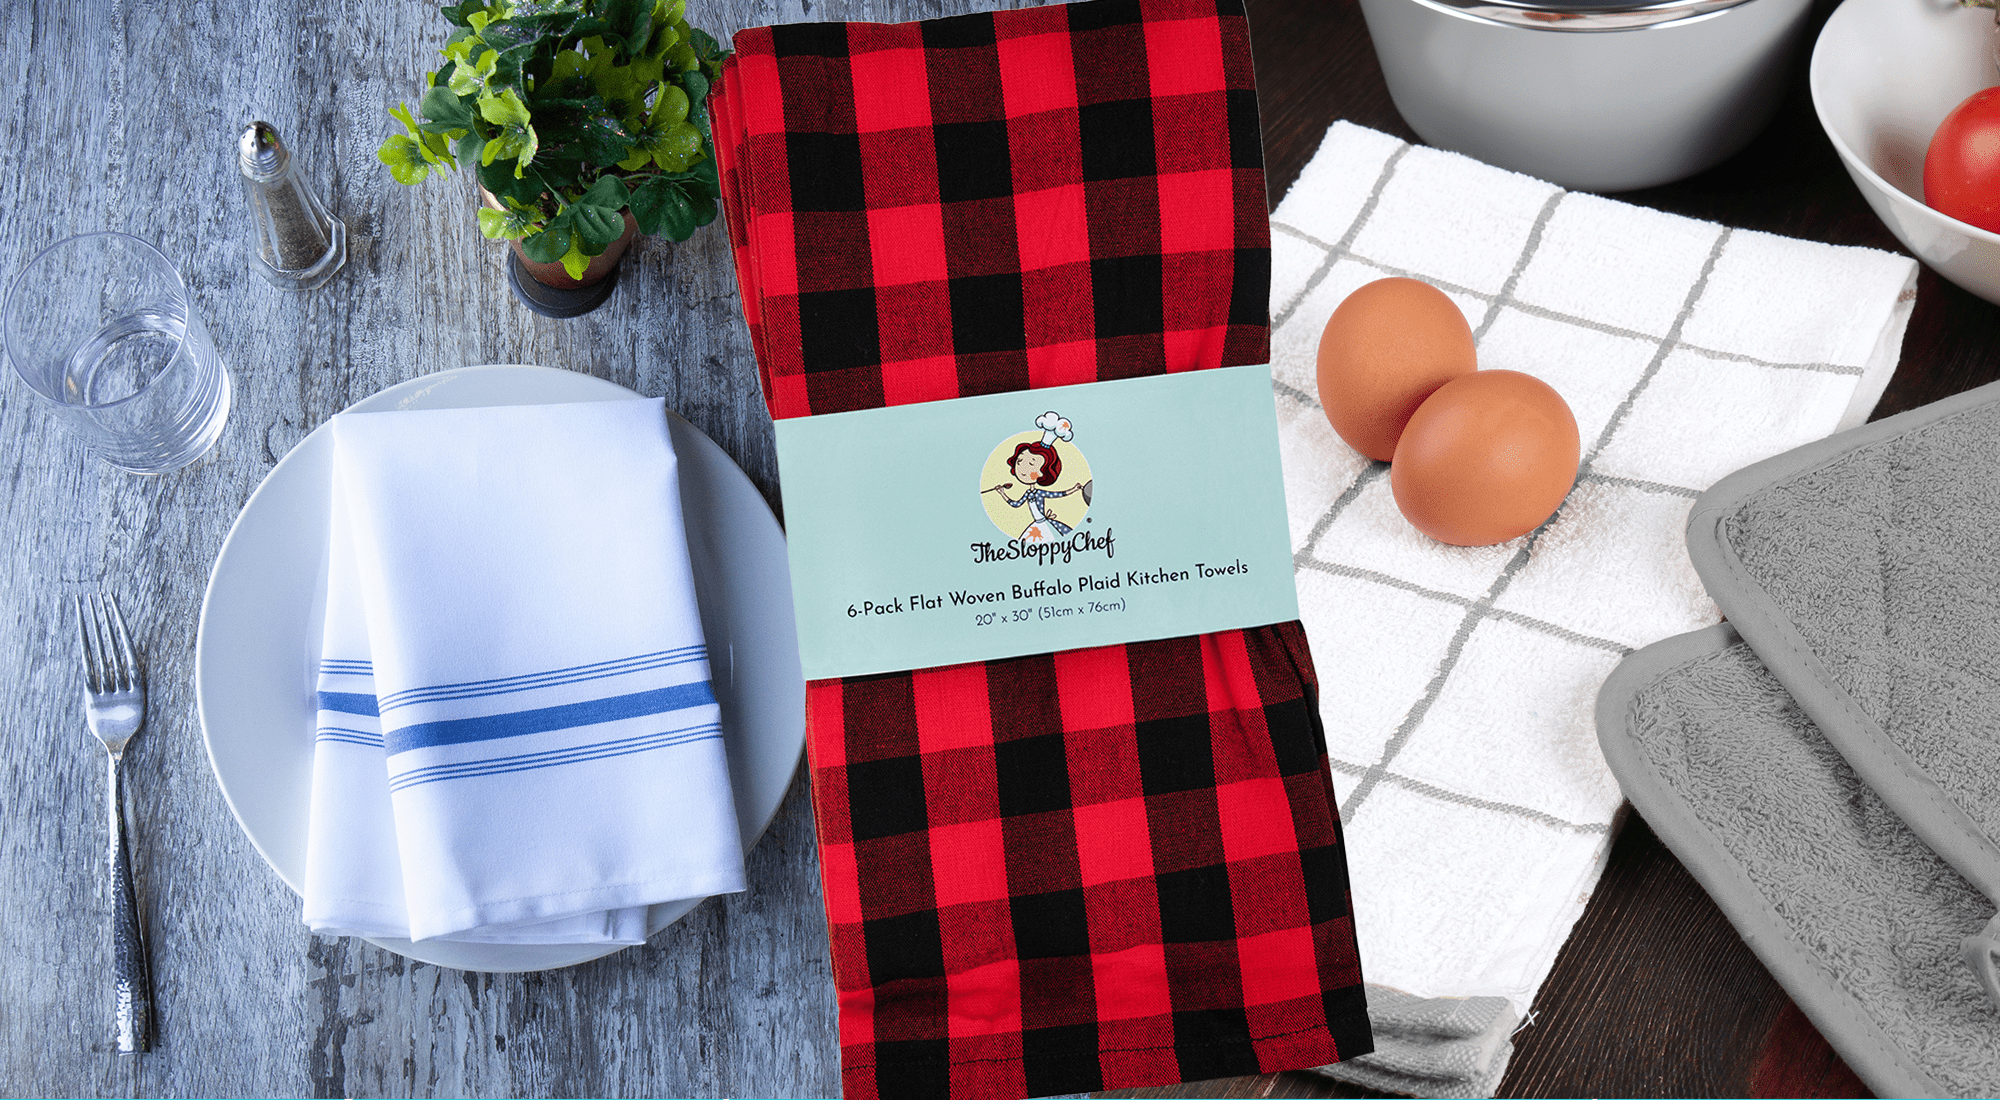 Arkwright 6 Pack of Buffalo Plaid Kitchen Towels - 20 x 30 - Black